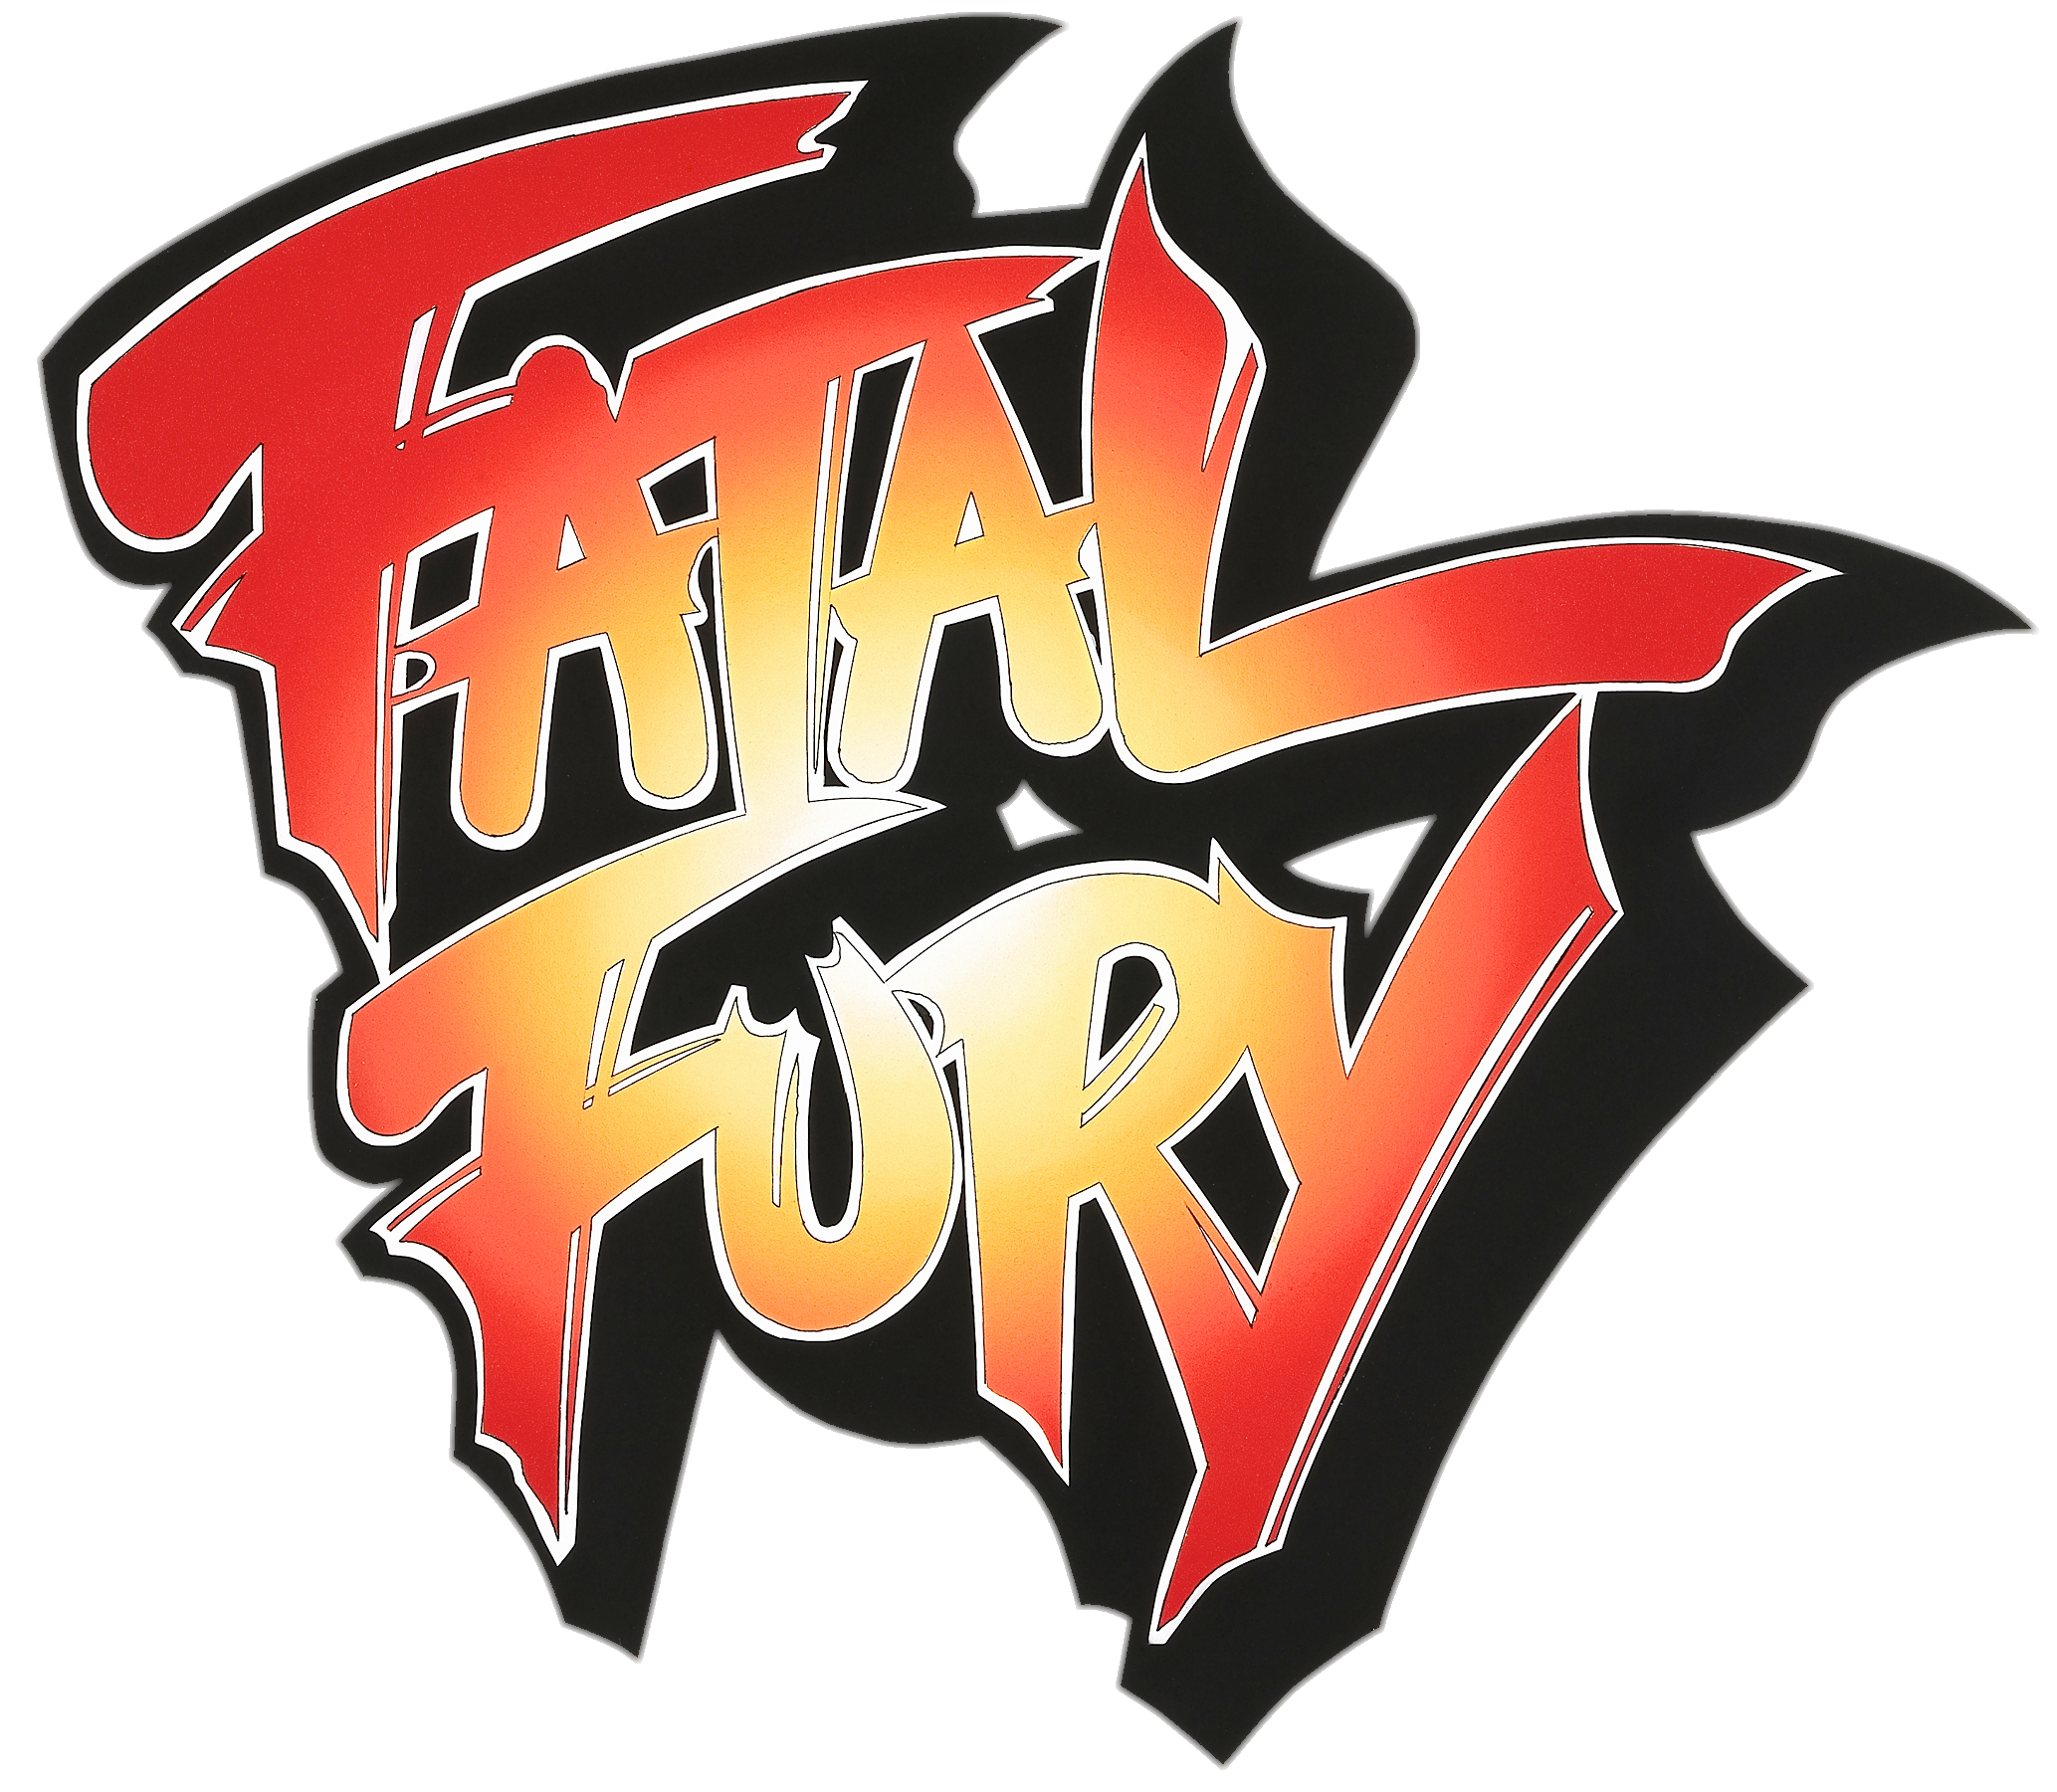 FATAL FURY TEAM  King of fighters, Fighter, Capcom art